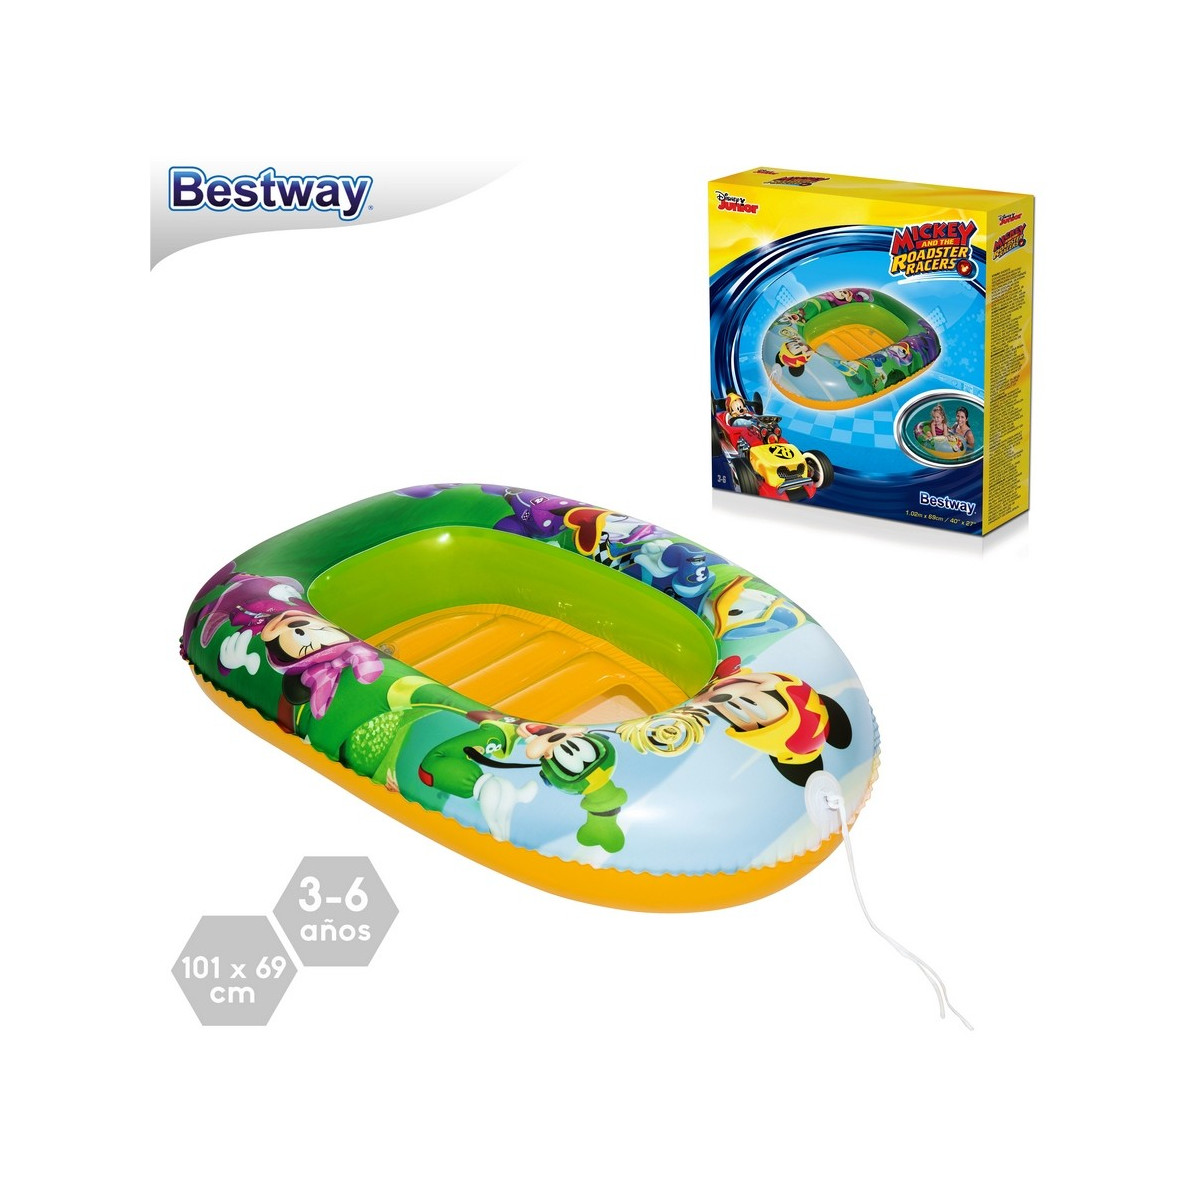 Bateau gonflable mickey 101 x 68 cm